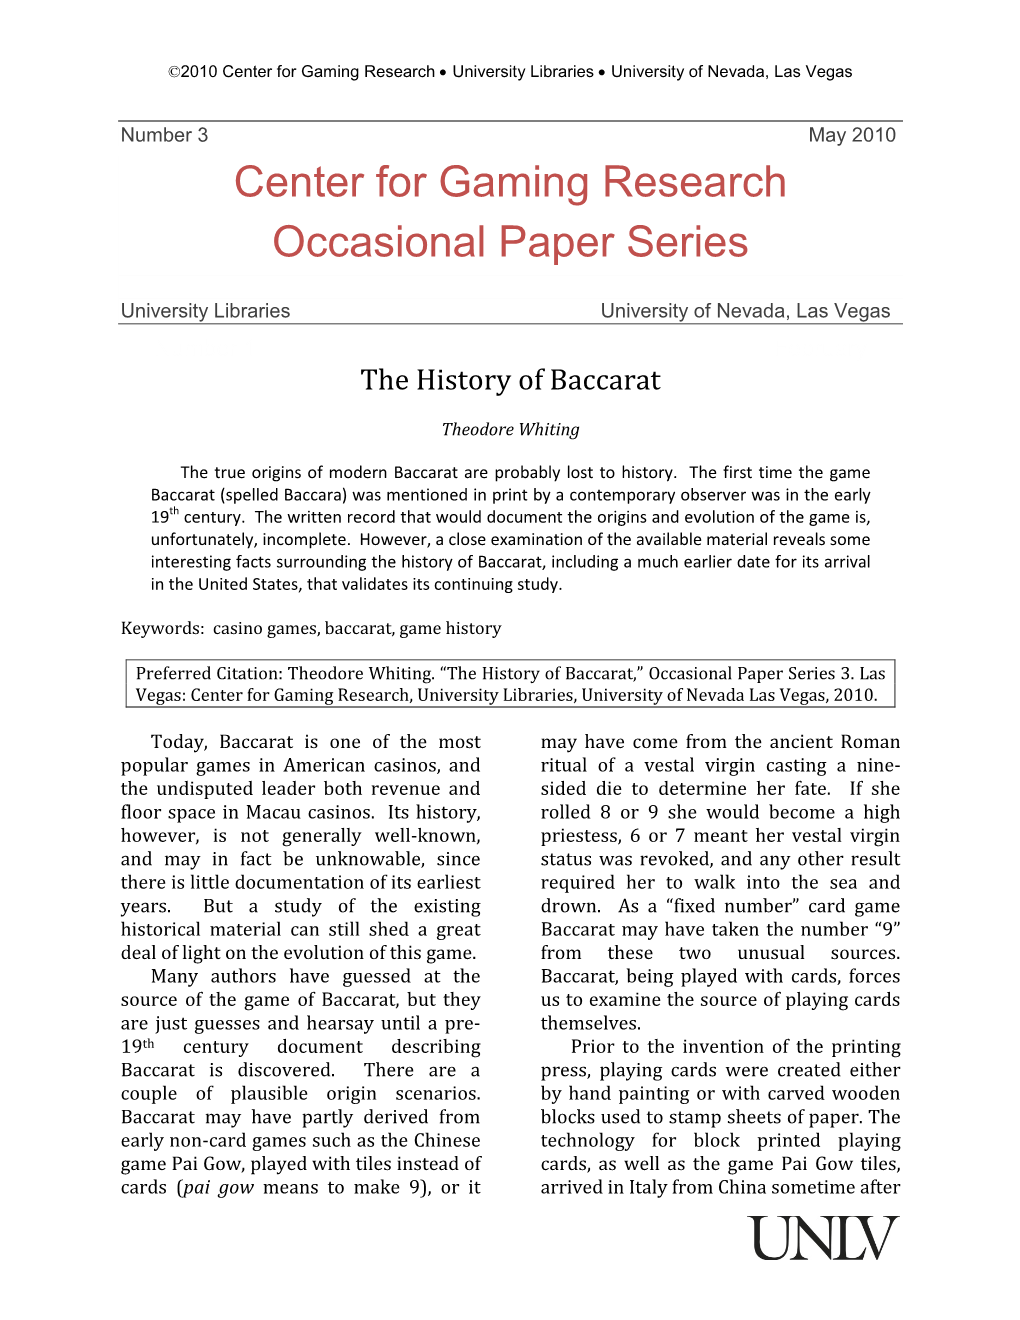 Center for Gaming Research Occasional Paper Series